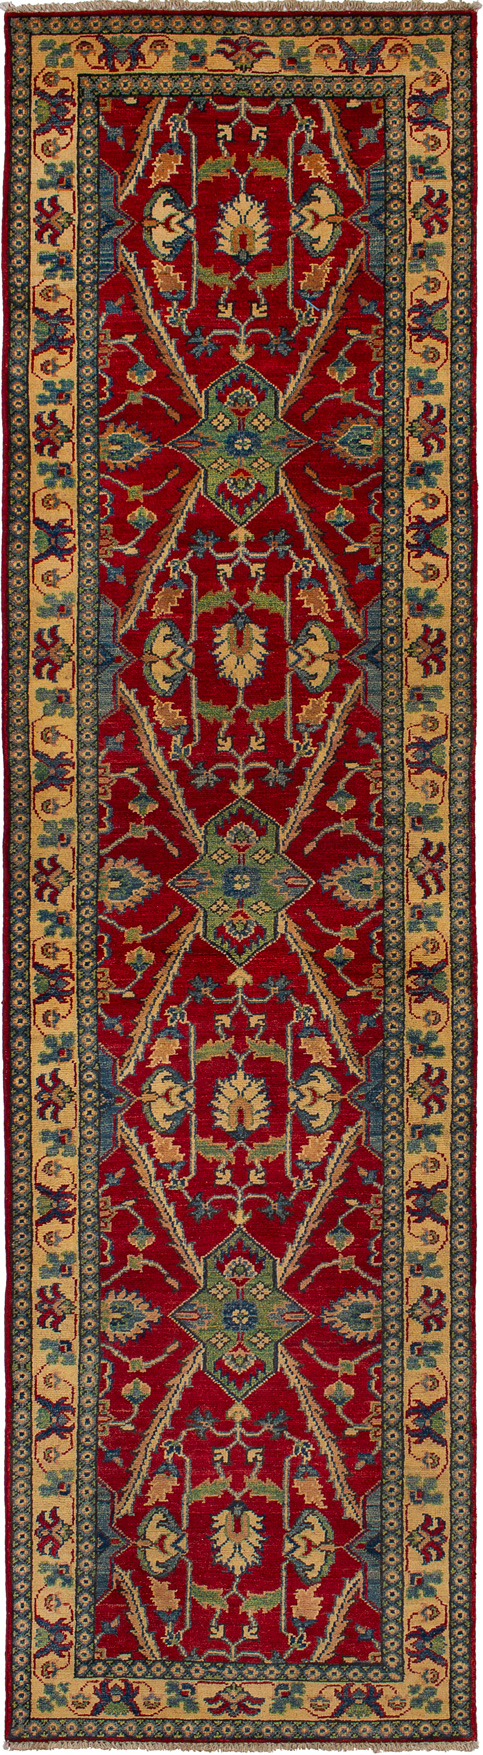 Hand-knotted Finest Gazni Red Wool Rug 2'7" x 9'9"  Size: 2'7" x 9'9"  